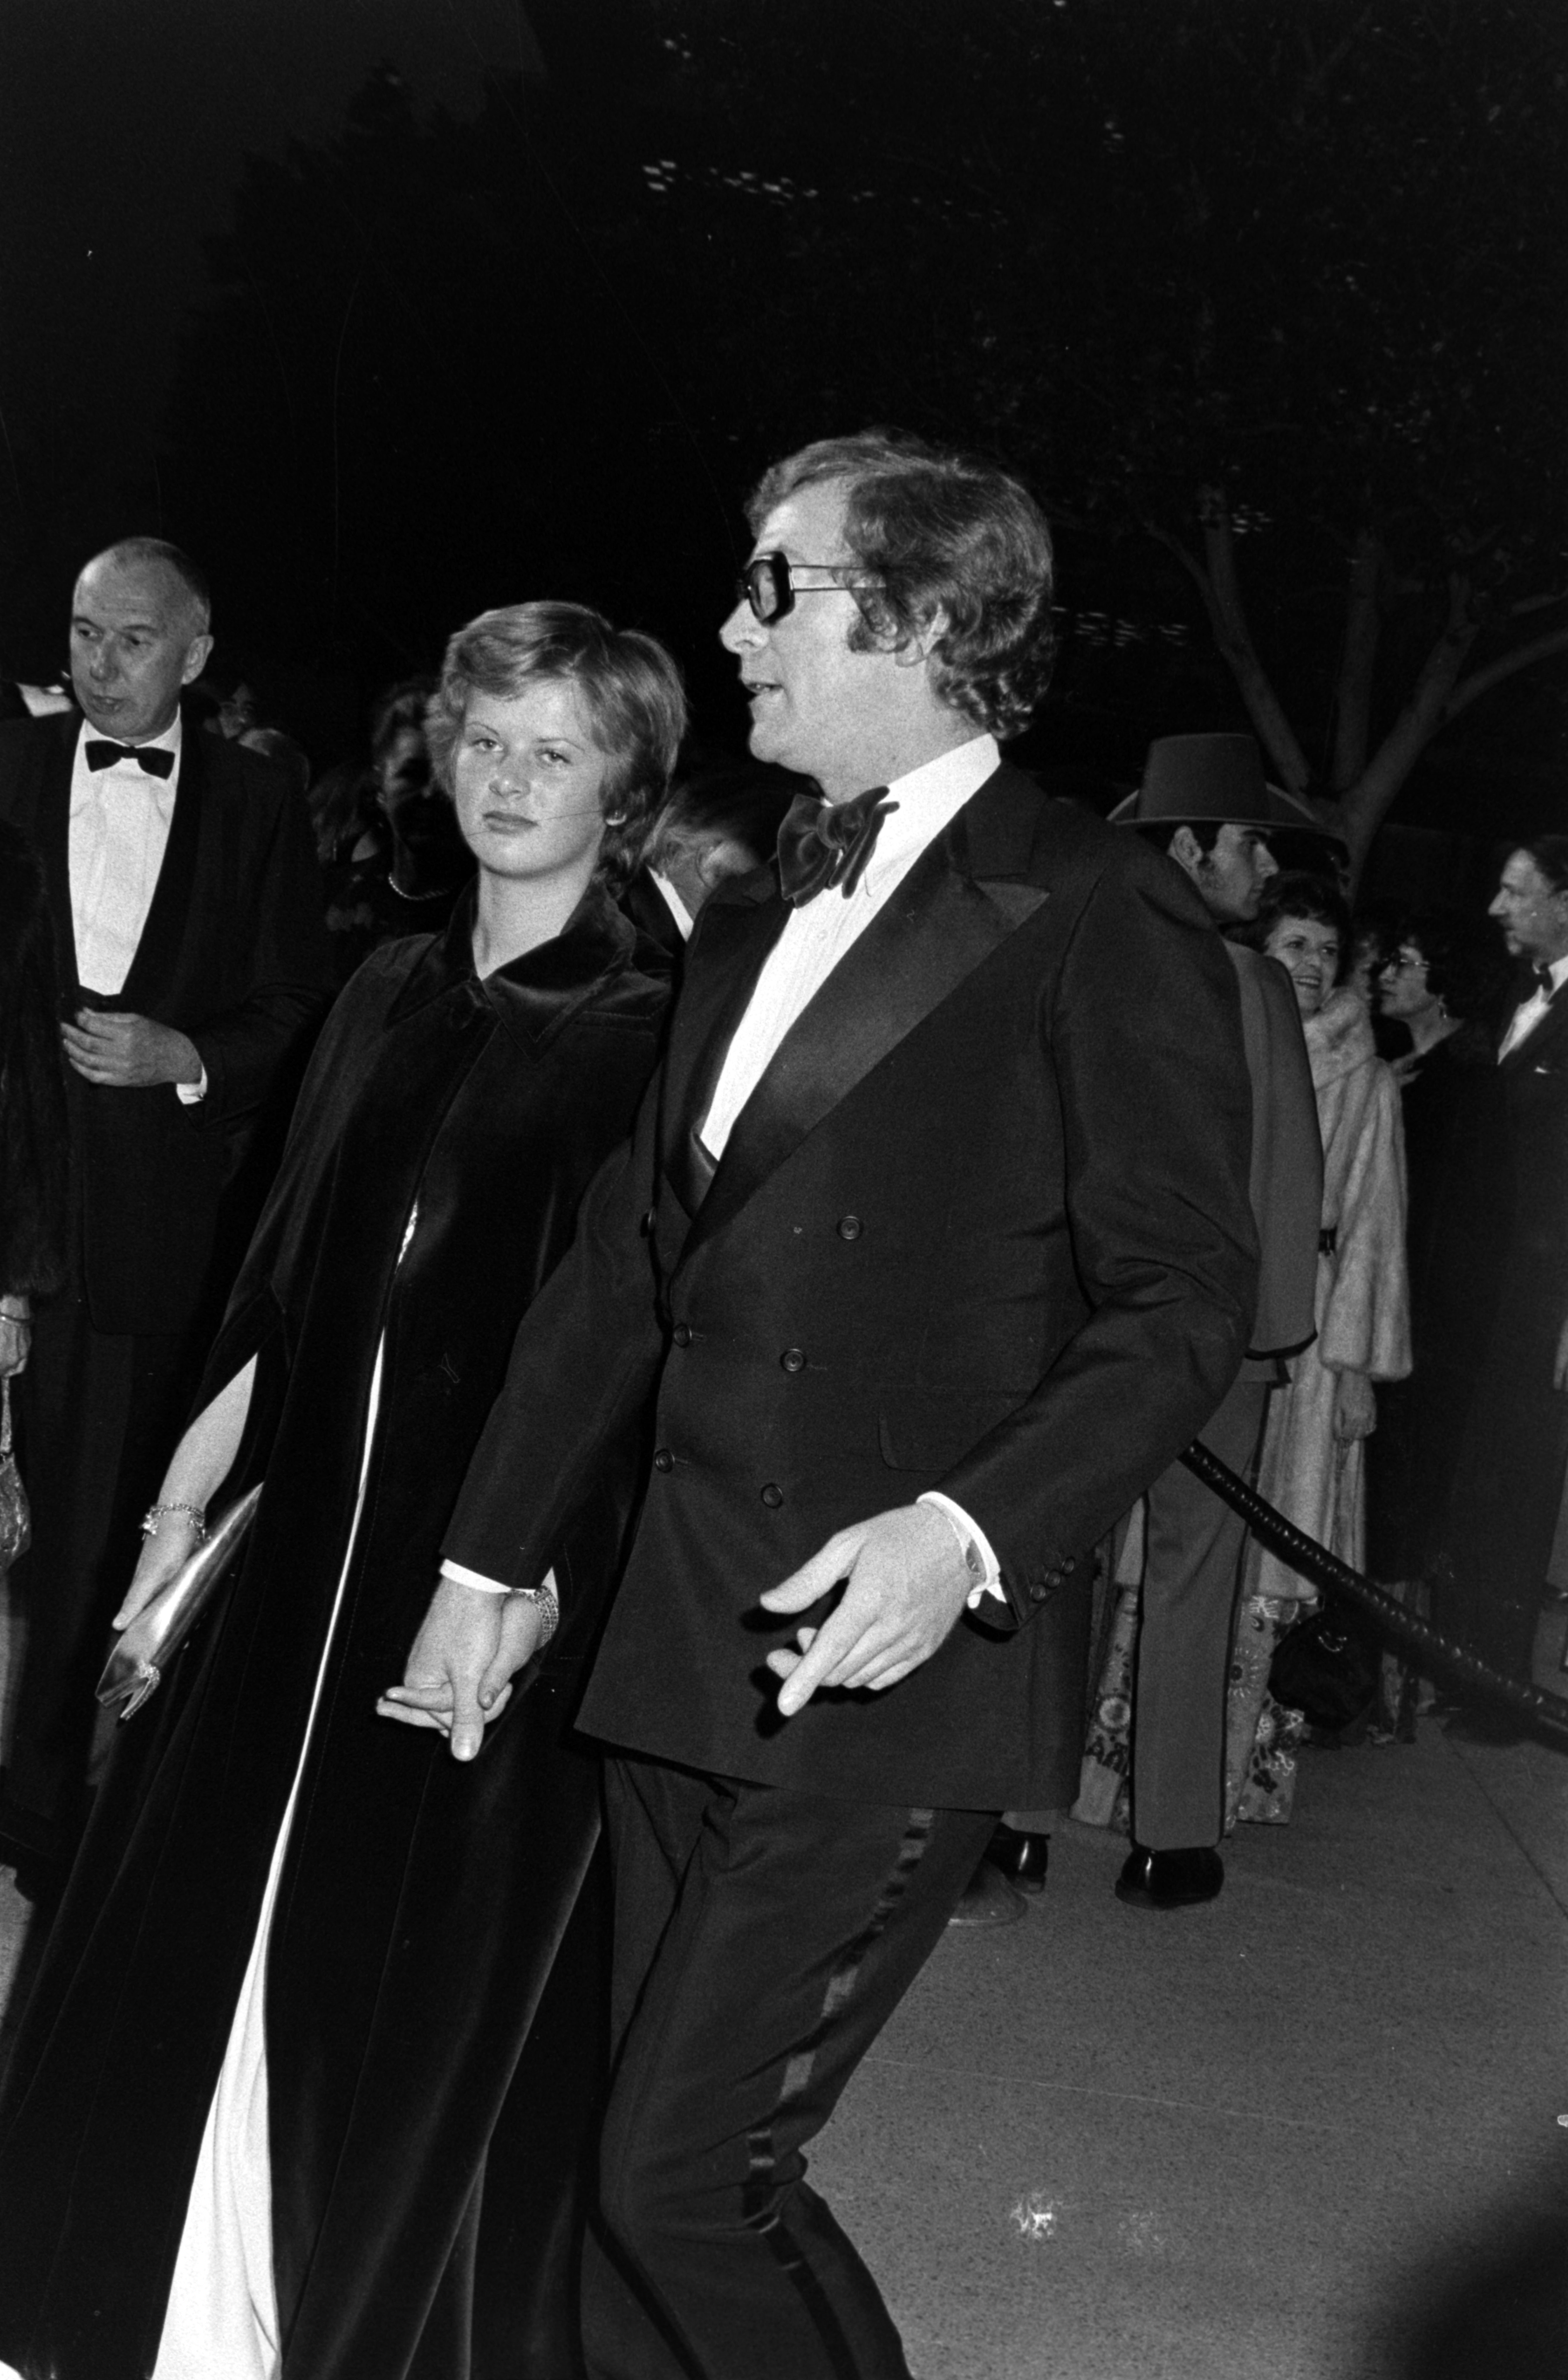 Dominique Caine (L) and Michael Caine attend the 45th Academy Awards on March 27, 1973, in Los Angeles, California. | Source: Getty Images